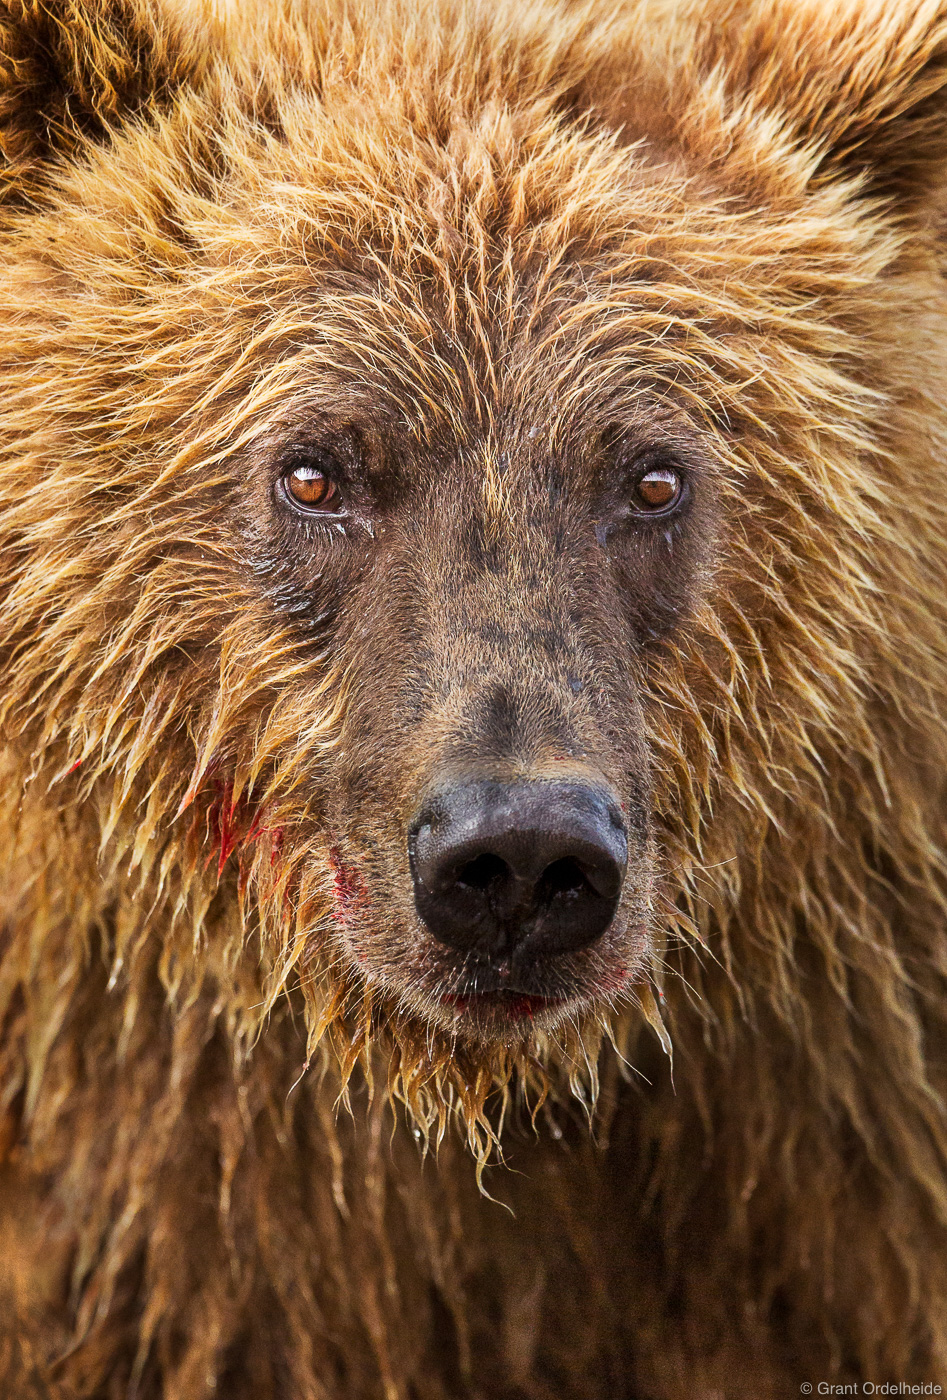 A portrait of a young brown bear in Alaska's Katmai National Park and Preserve.